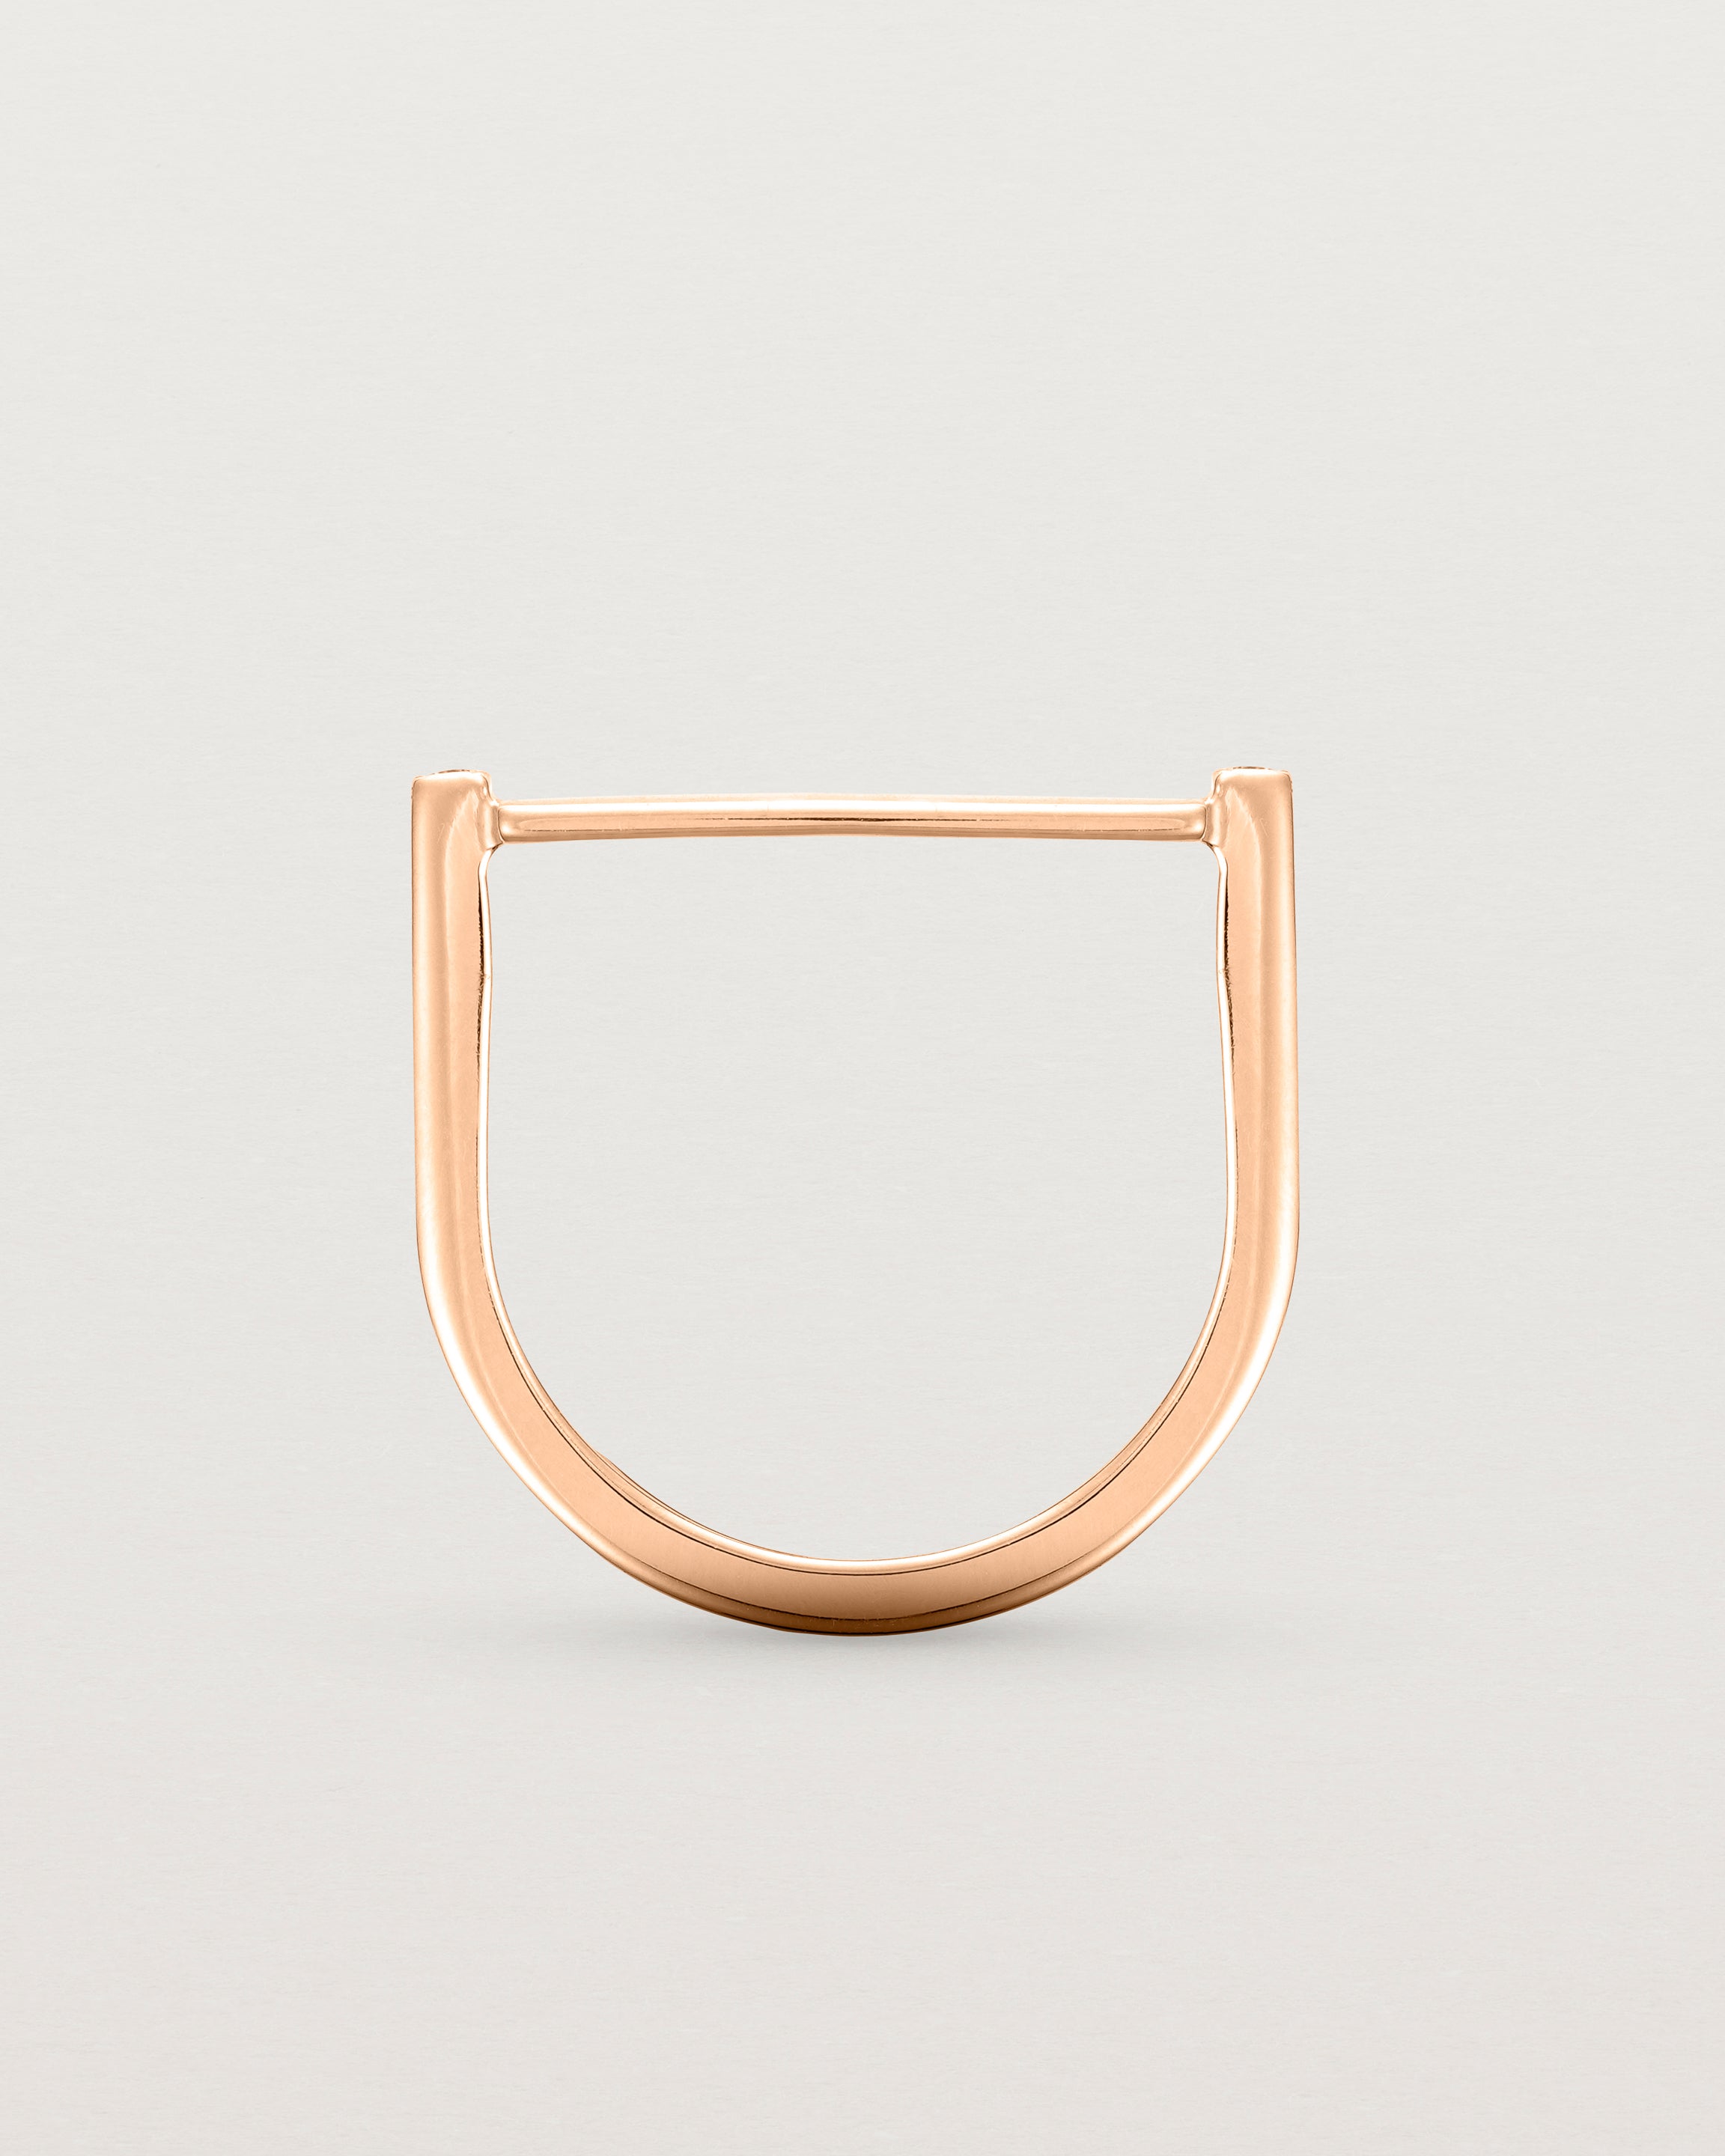 Standing view of the Antares Plate Ring | Diamonds | Rose Gold.